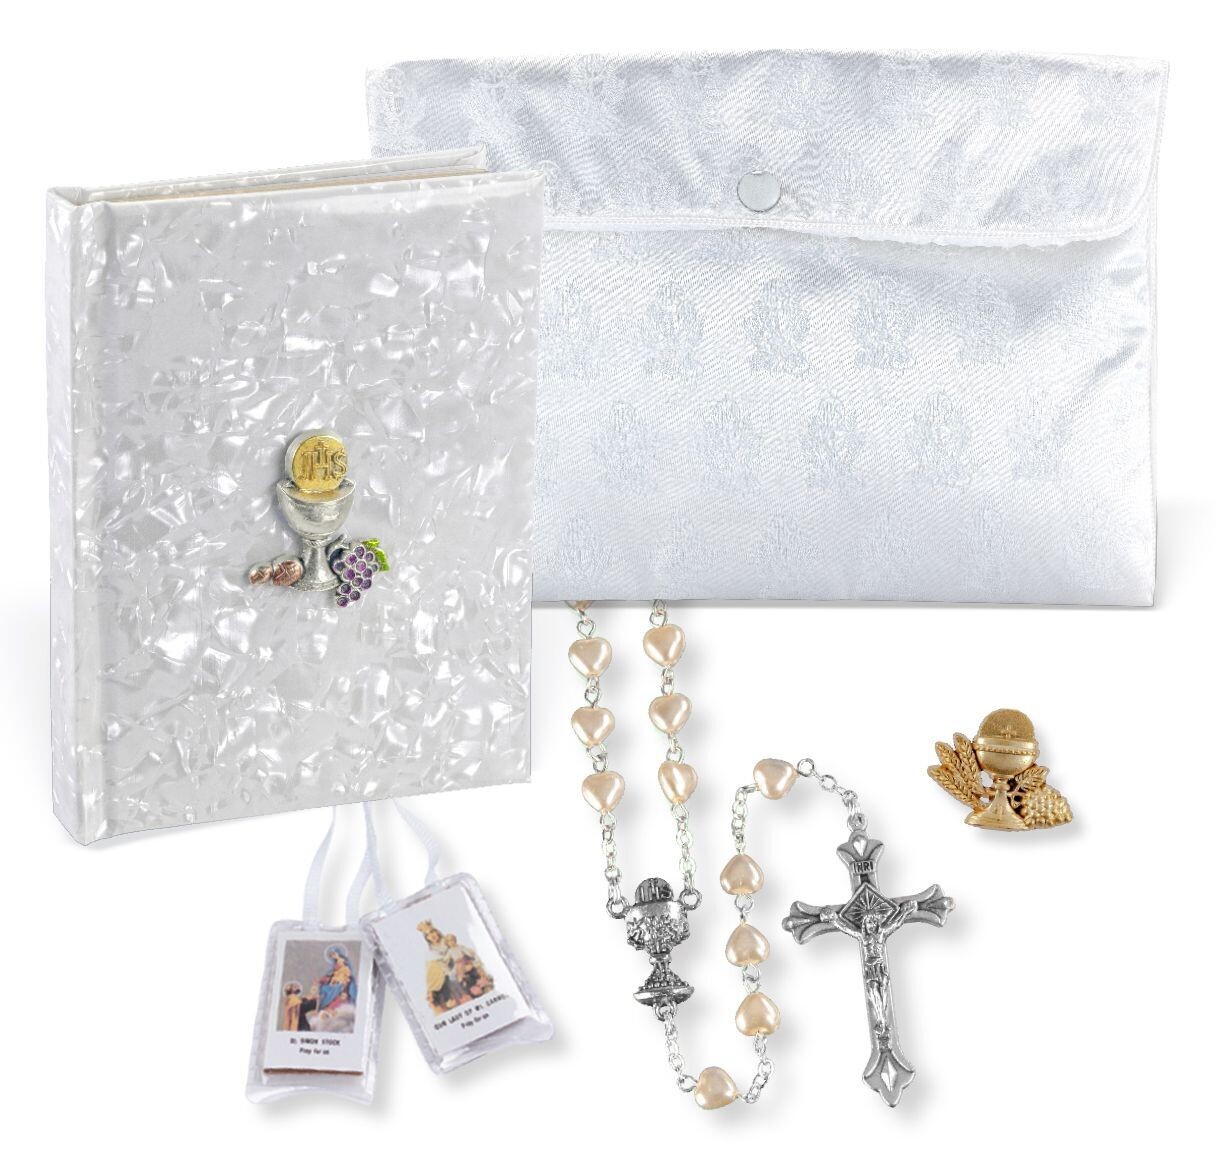 5 piece Deluxe White Pearlized Communion Gift Set